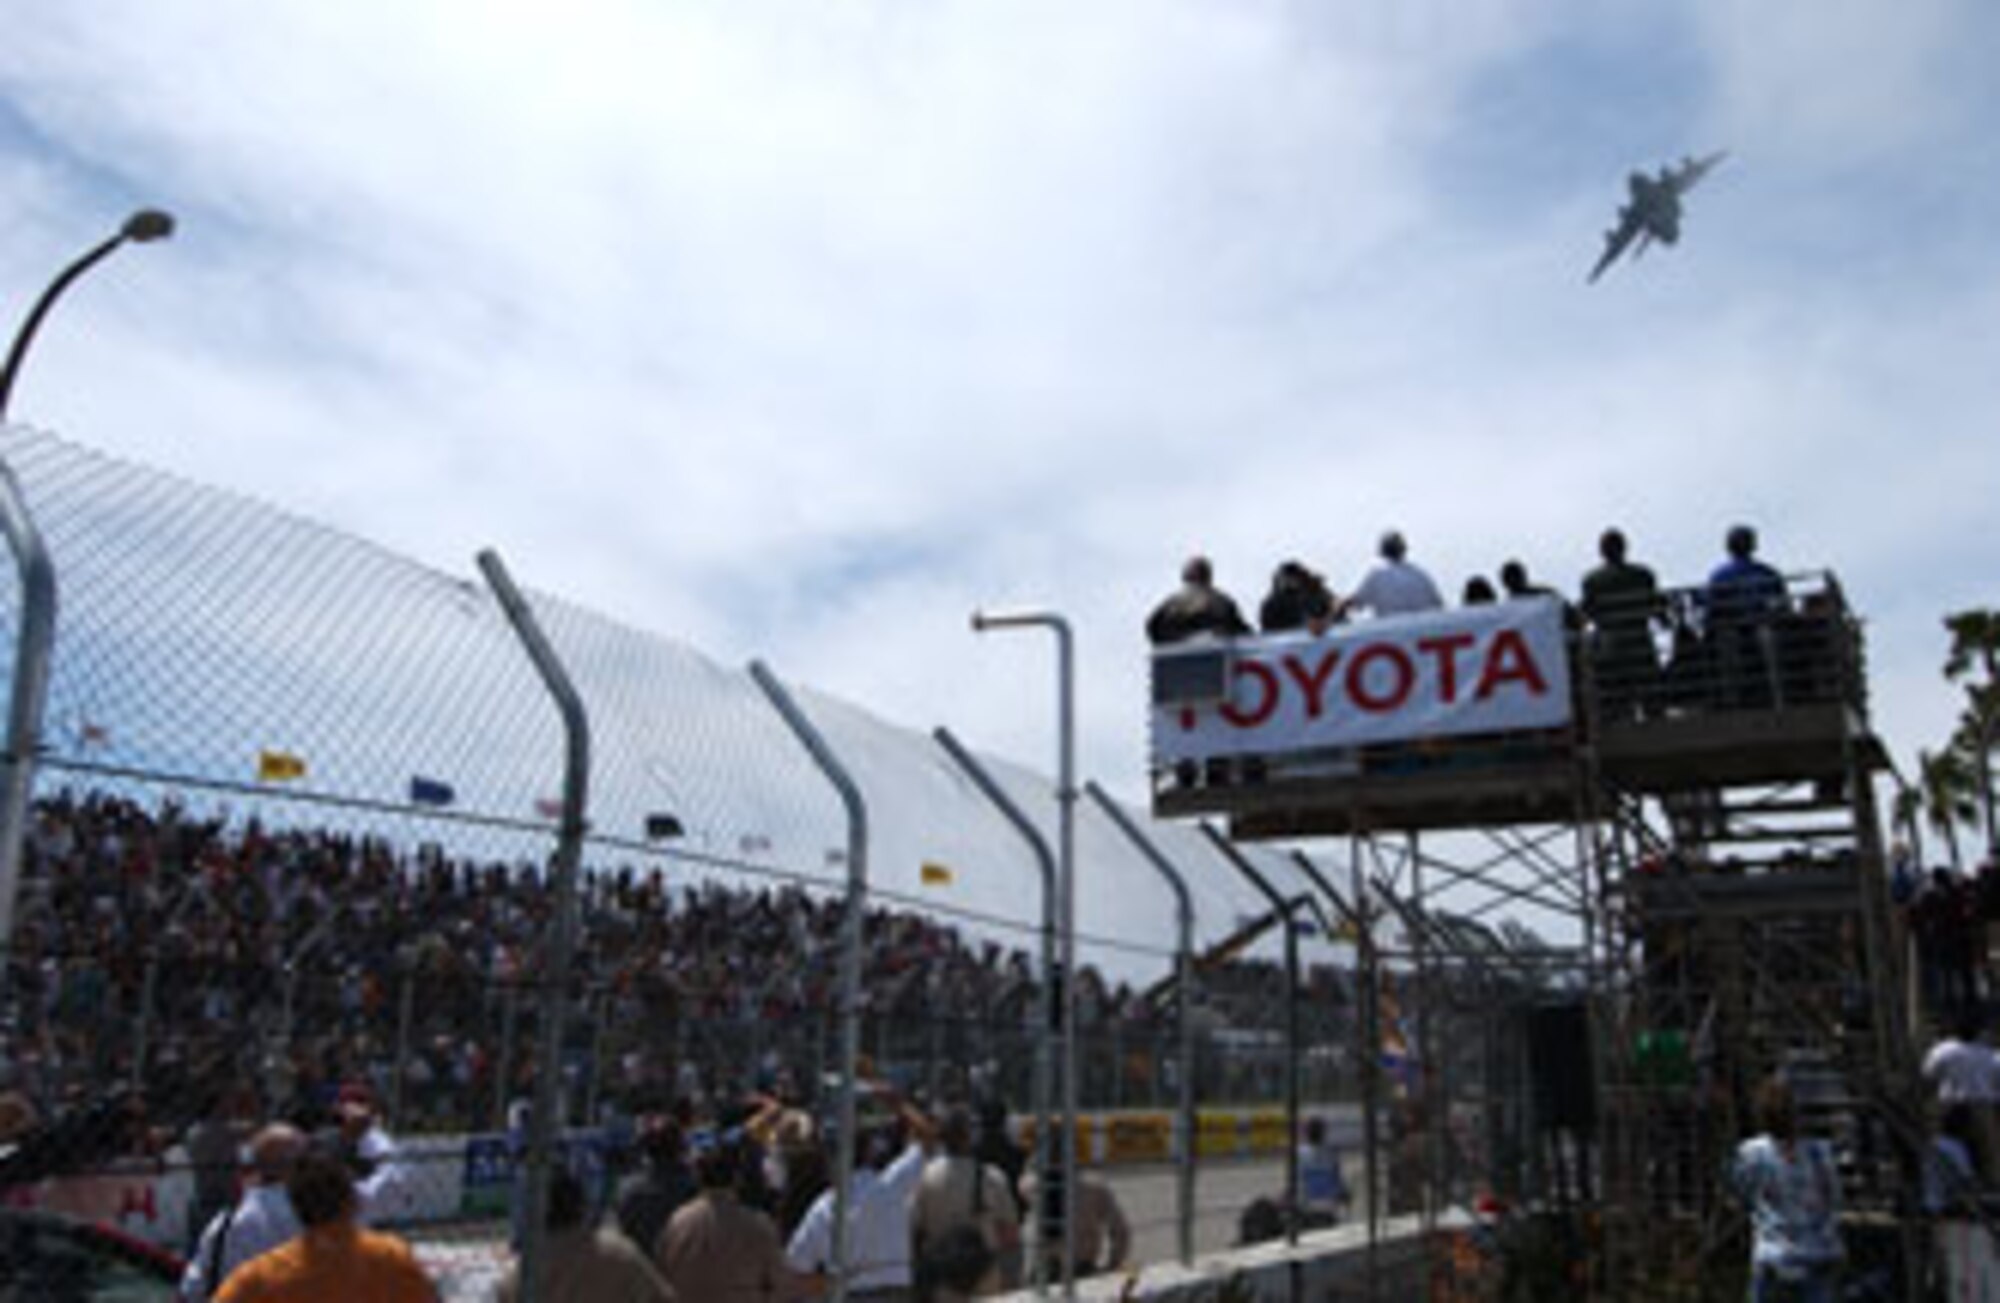 A C-17 Globemaster III from the 729th Airlift Squadron at March Air Reserve Base, California, thunders over the crowd at the 33rd Annual Toyota Grand Prix of Long Beach on 14 April, 2007. The C-17 was part of the opening ceremony.   The event ran for three days and included competitions like the ‘Fast and Furious 3’ Team Drift Challenge, SCCA Speed GT Challenge and the 31st Pro/Celebrity race.   (U.S. Air Force photo by SrA Daniel St. Pierre)


